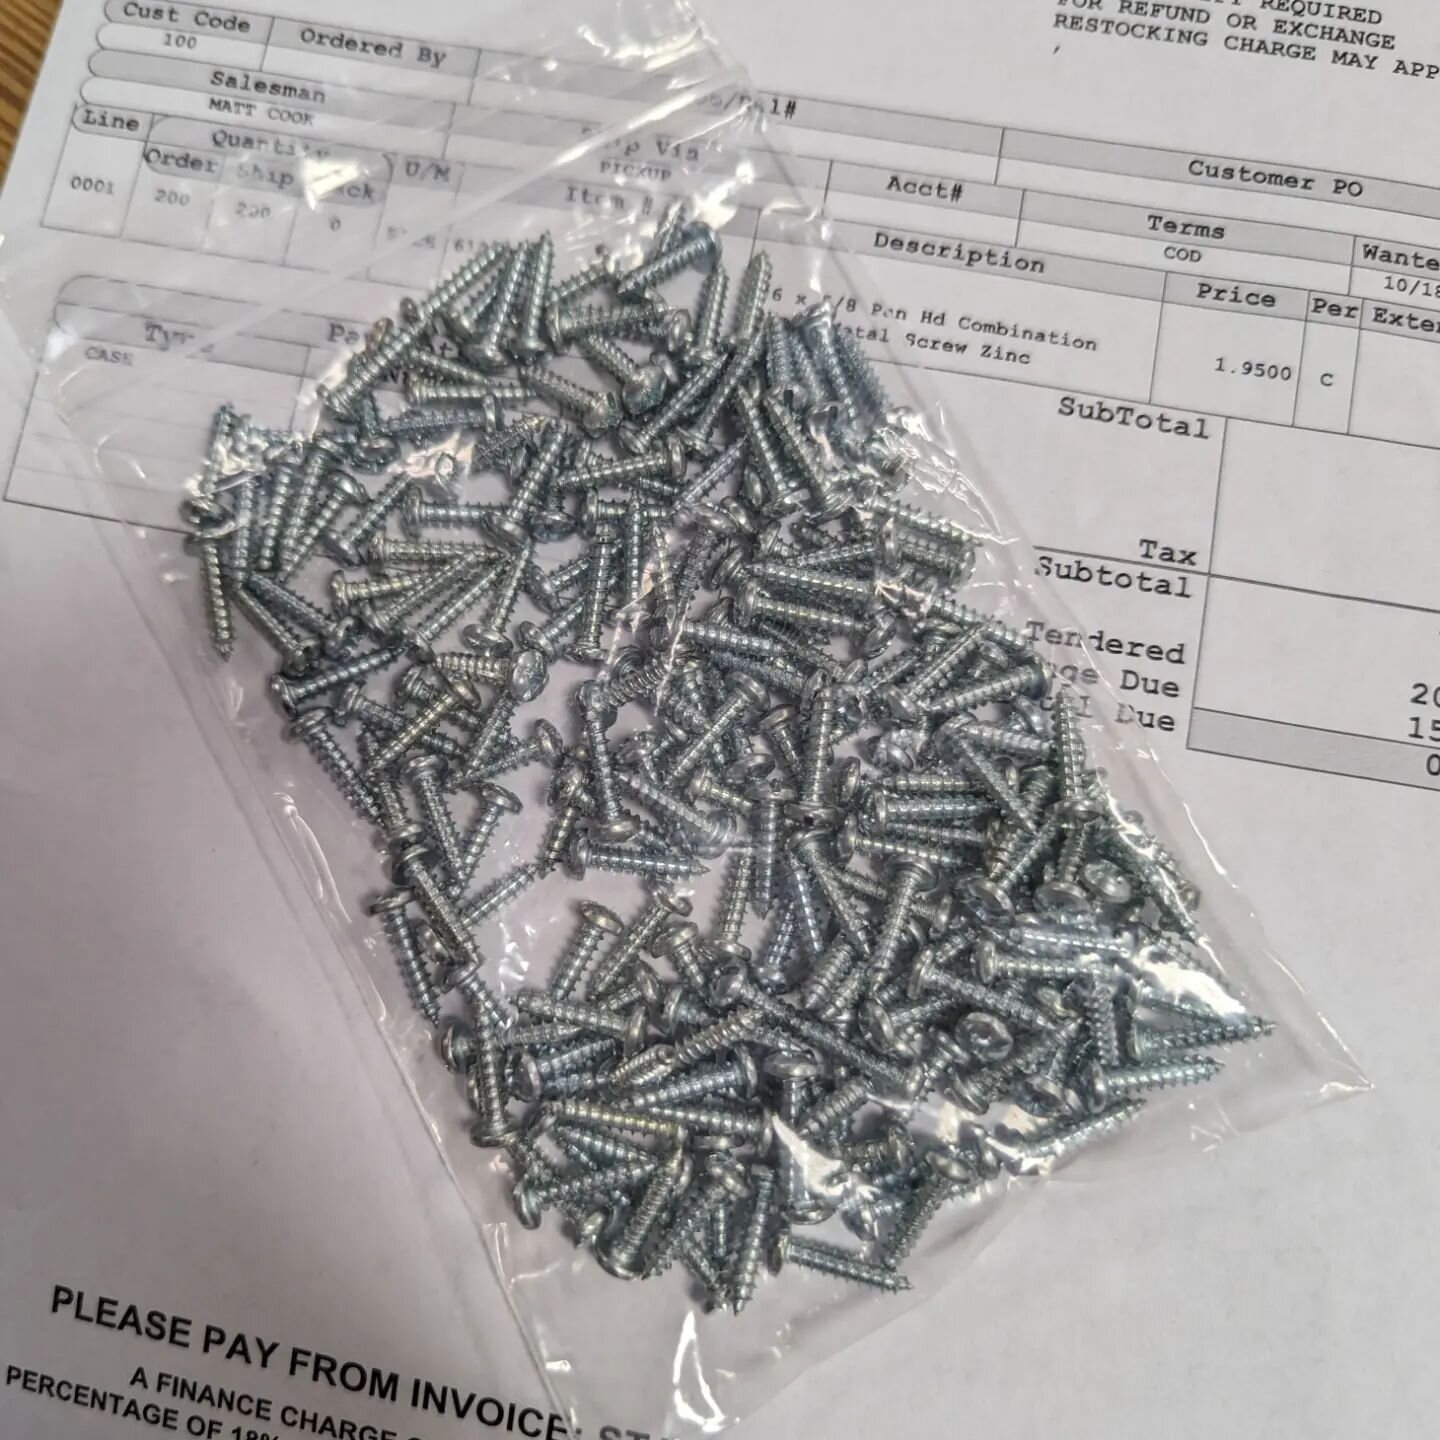 I've bragged on these guys before, here's one more.

I needed 200 #6 x 5/8&quot; panhead screws. Dropped by Valley Fasteners on Campbell Ave to see if they had them. Yep, and the grand total was $4.11.

Try them first before you head to the big box s